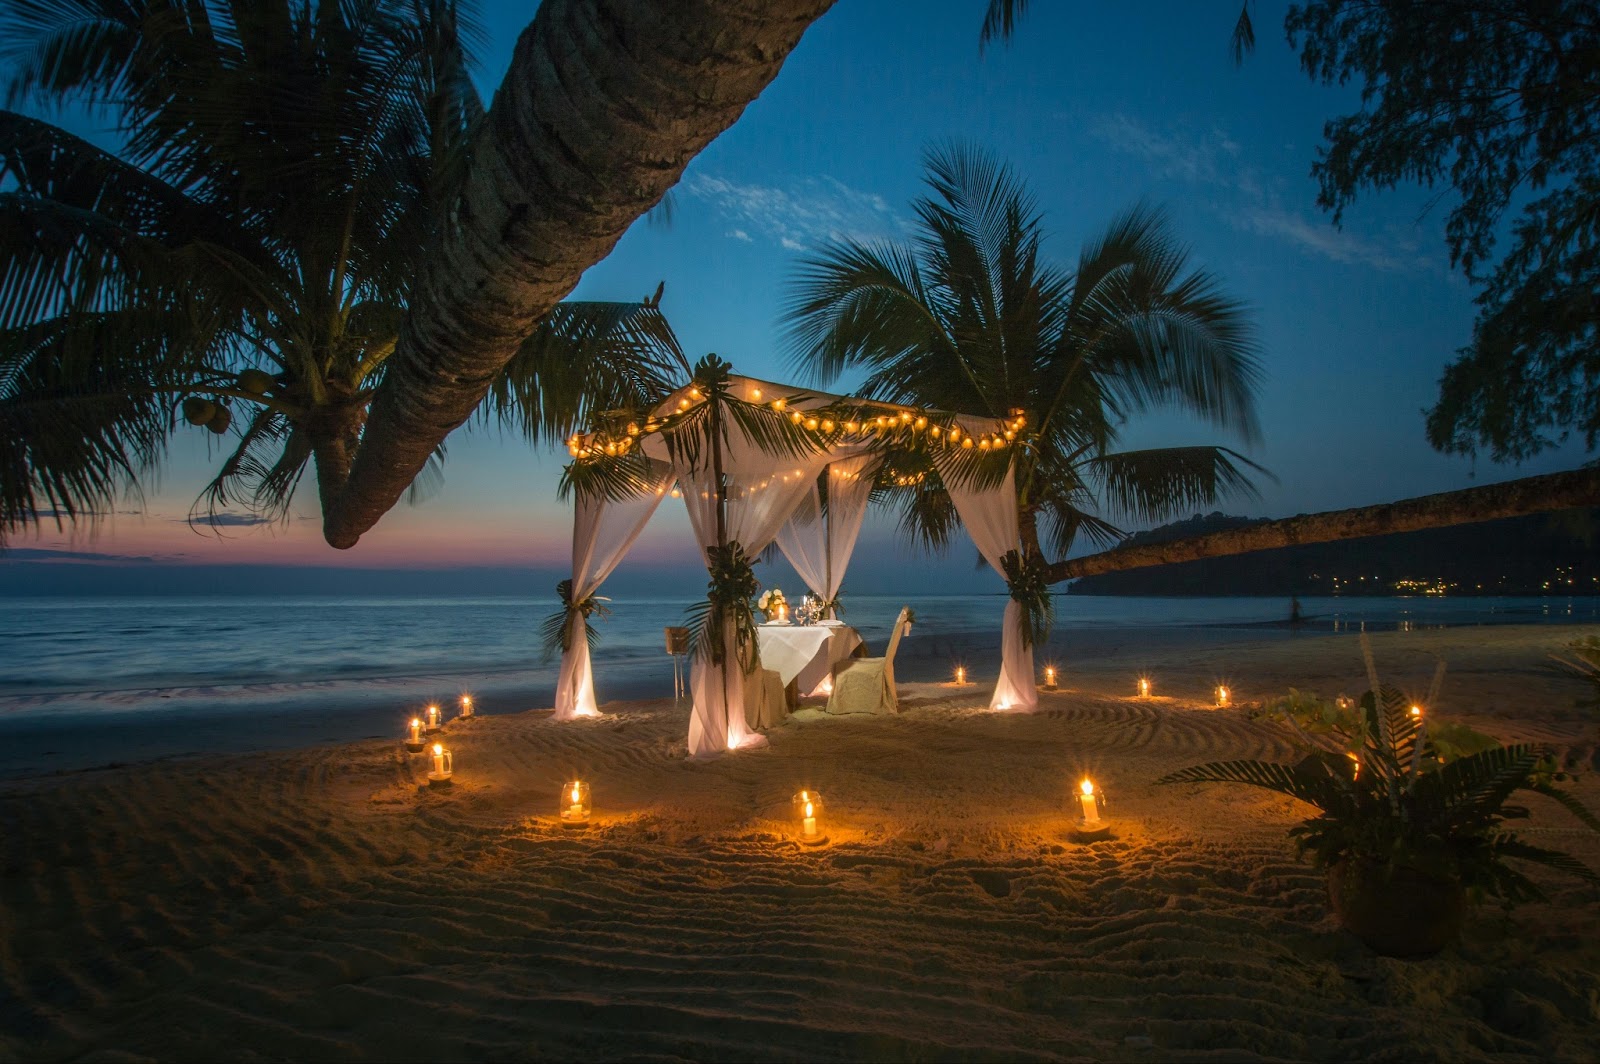 A couple enjoying a romantic candlelit dinner on the beach at sunset.